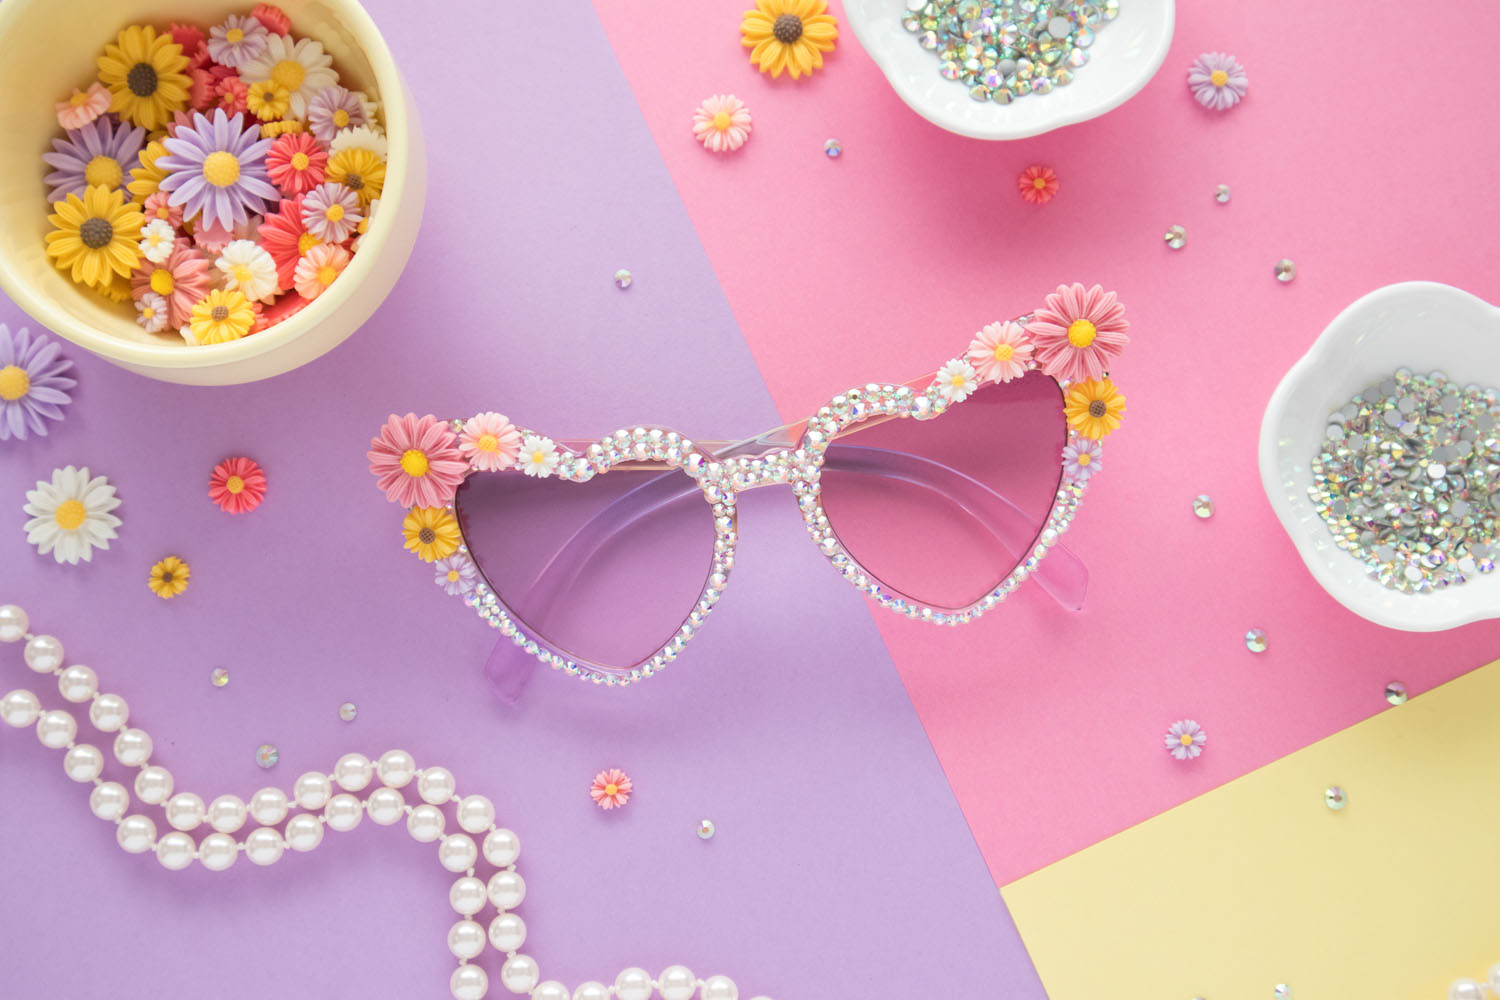 Flatlay of rhinestone sunglasses. The sunglasses are in the center. They are heart shaped and covered in rhinestones. The corners have colorful daisy charms. Surrounding the sunglasses are dishes filled with rhinestones and daisy charms. The background color blocked with lavender, pink and yellow. There are also rhinestones, flower charms and a pearl necklace loosely placed on the background.